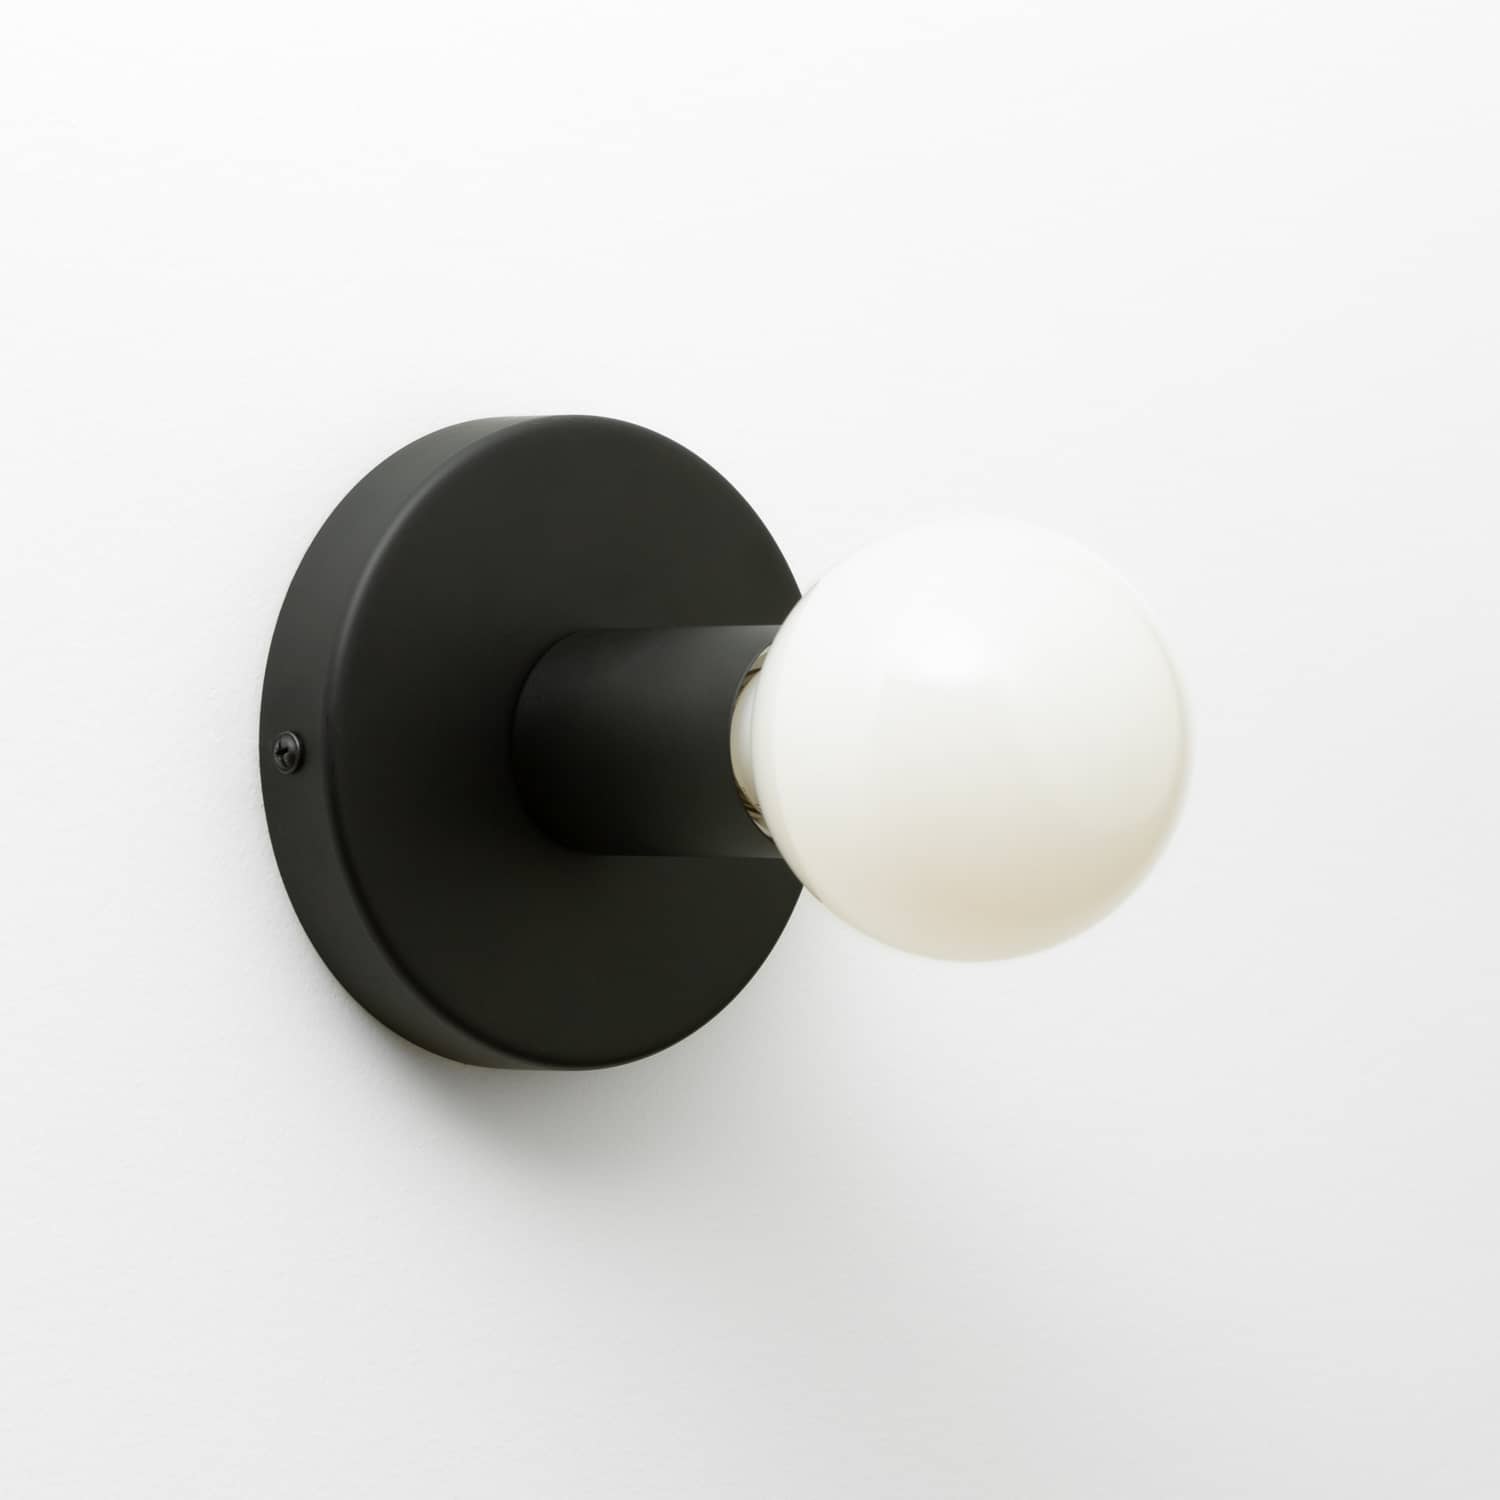 Button Light in Matte Black finish pictured with G25 milk glass light bulb